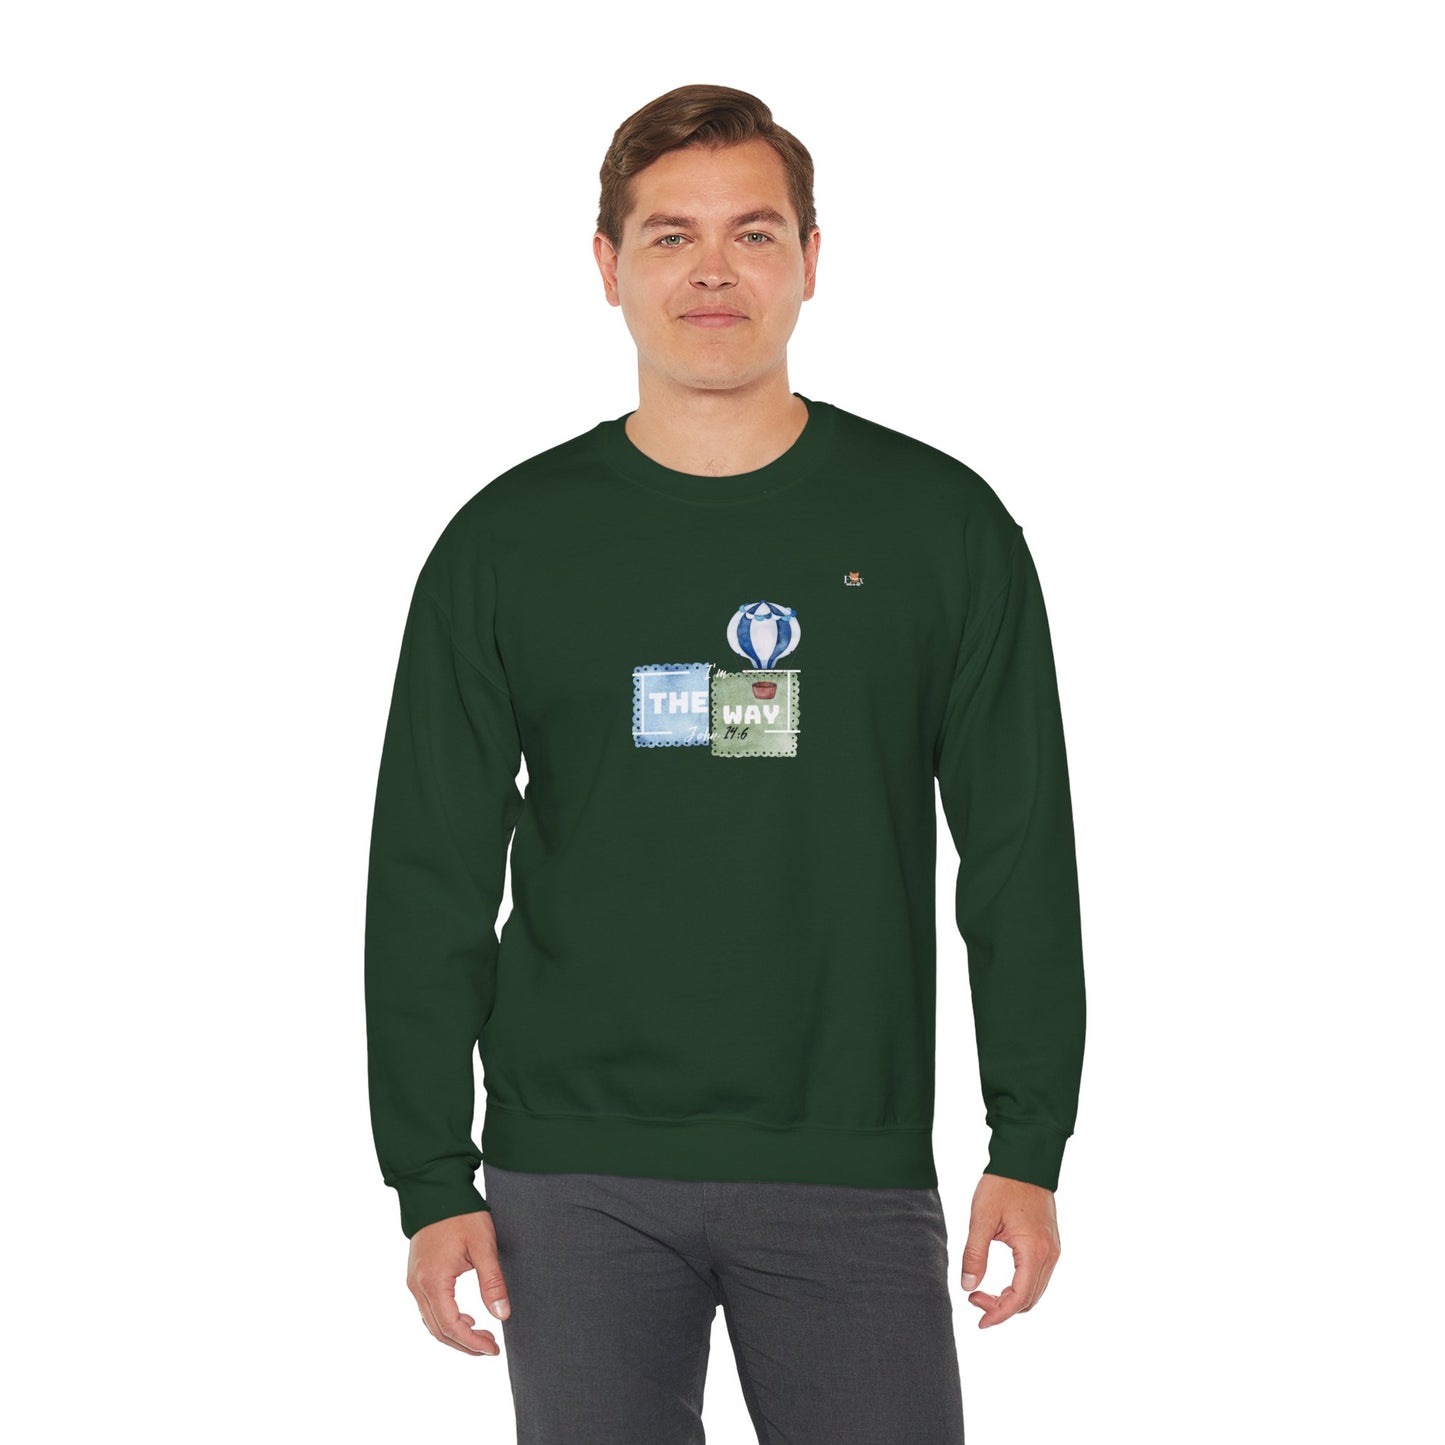 I Am The Way whit with Hot Air Balloons- Unisex Crewneck Sweatshirt